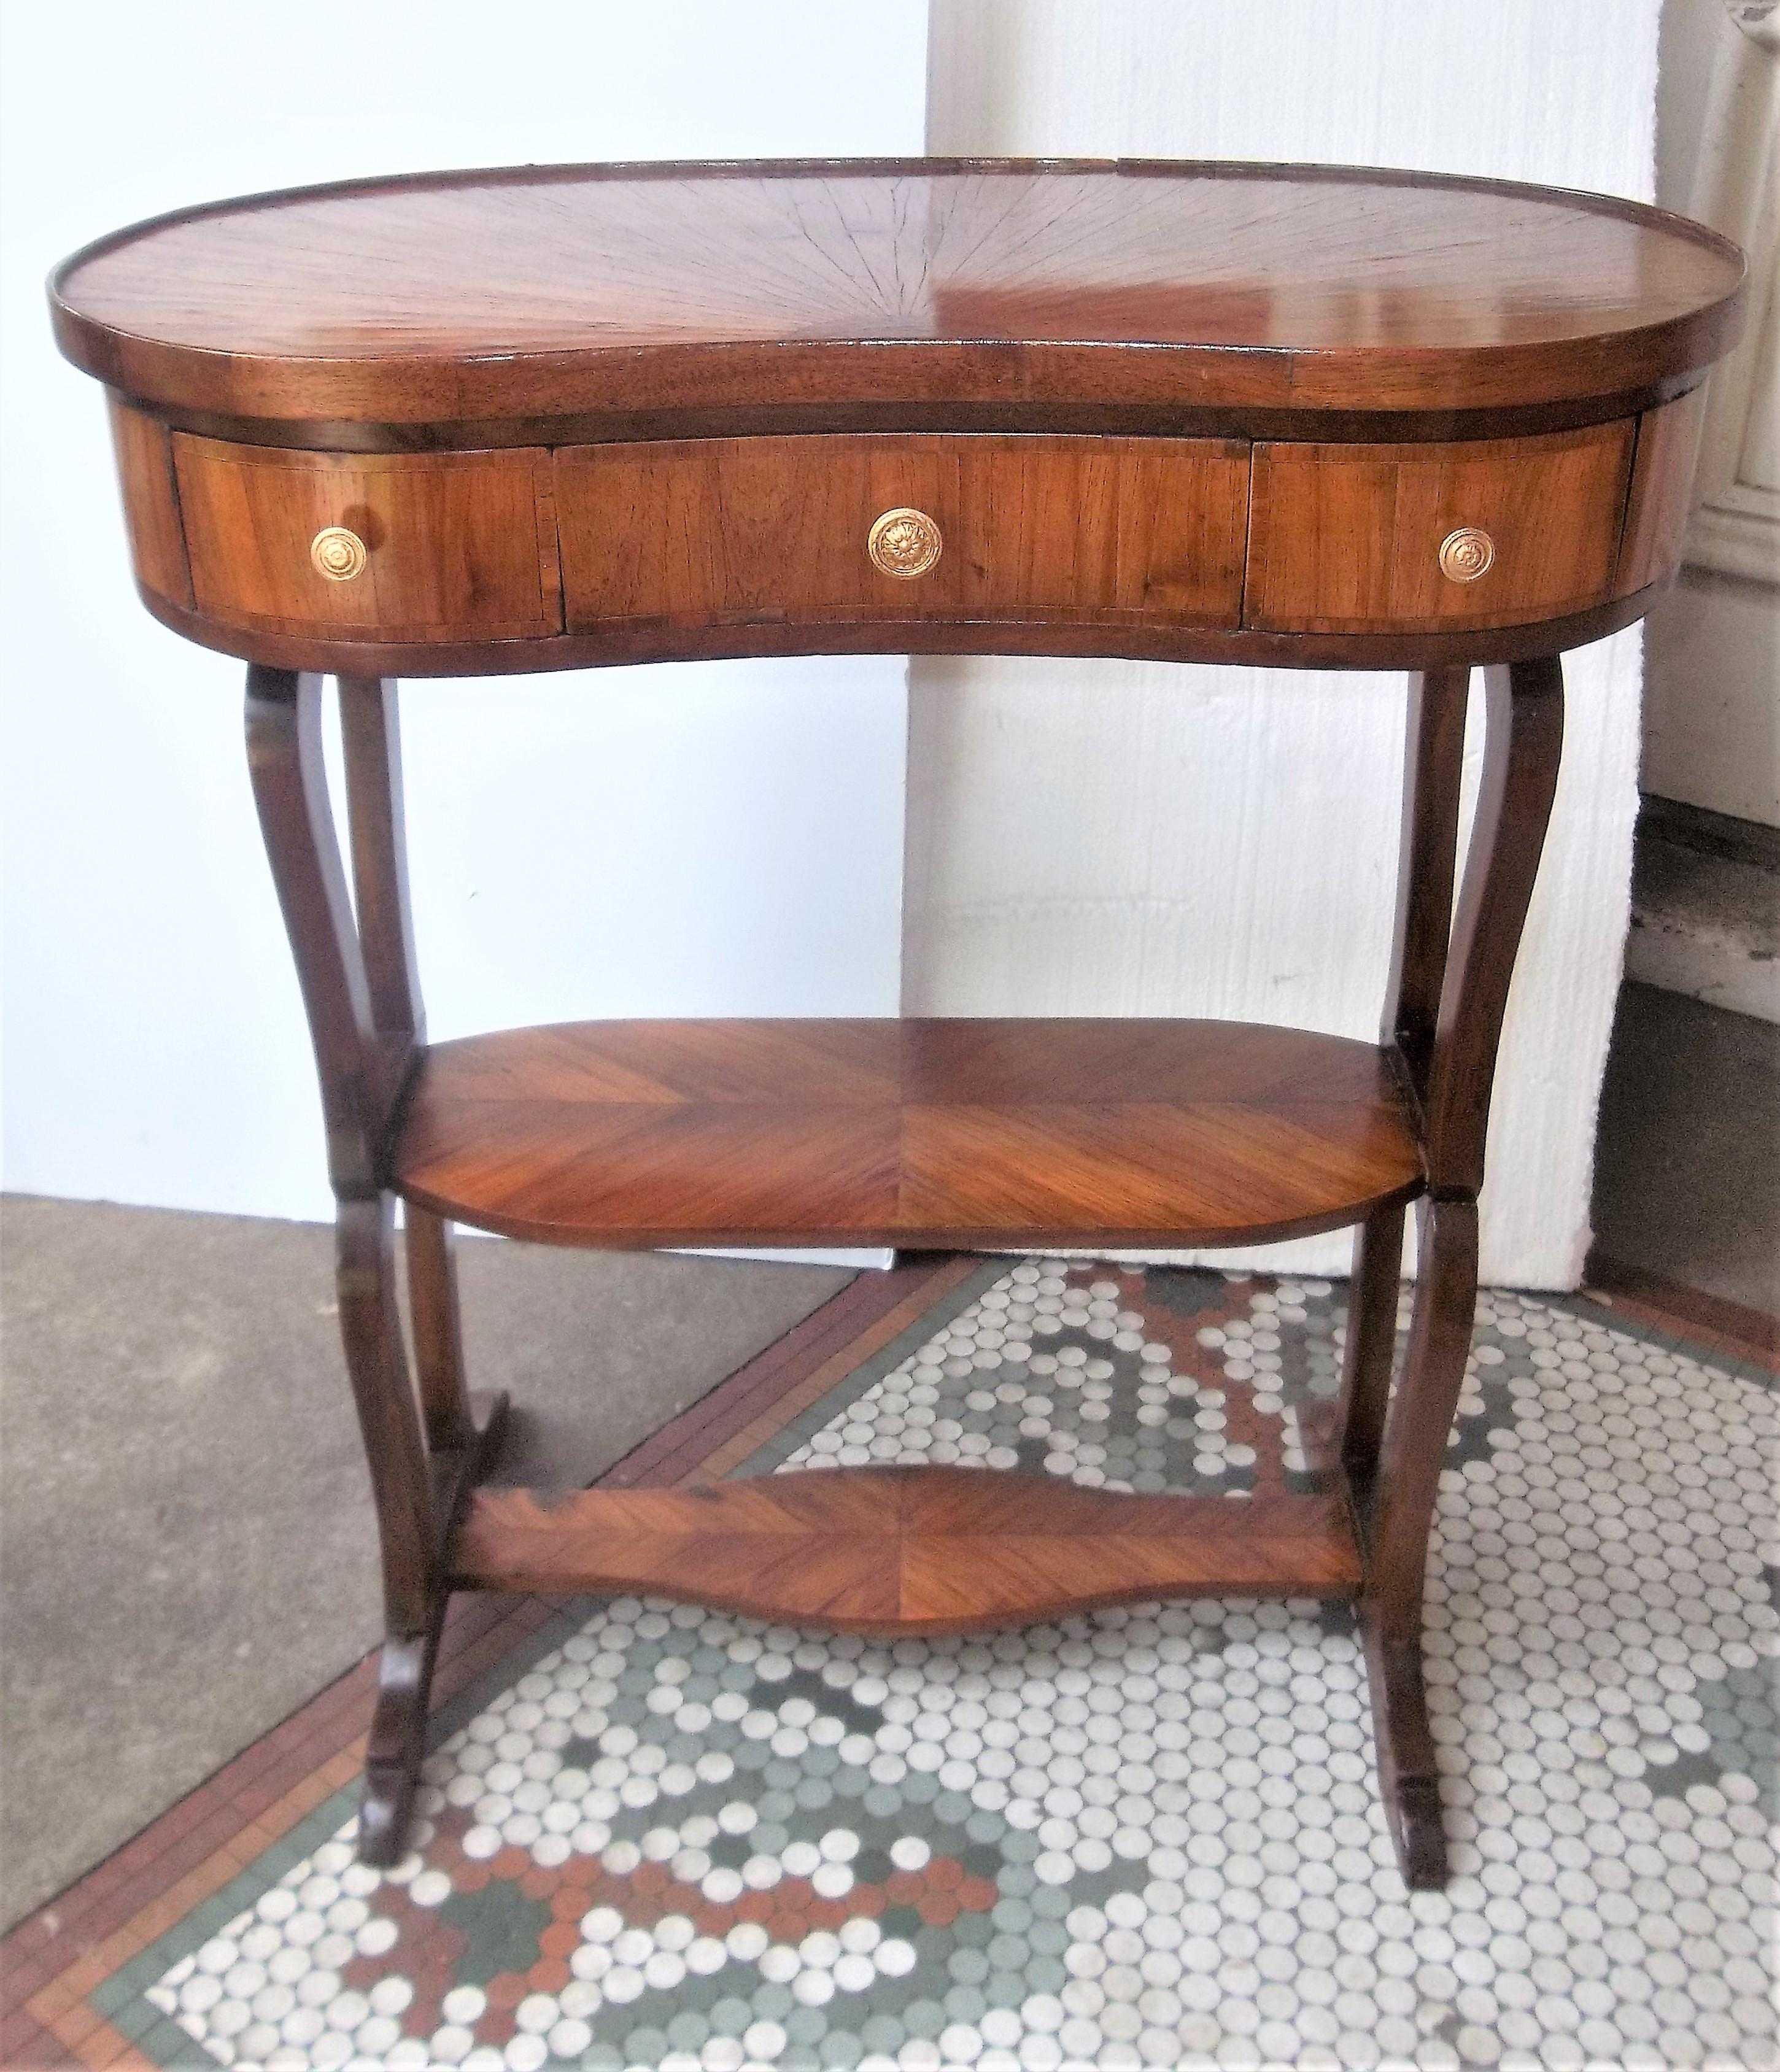 Louis Xvi Style Tulipwood Three-Tiered Desk or Dressing Table with Sunburst Top 2